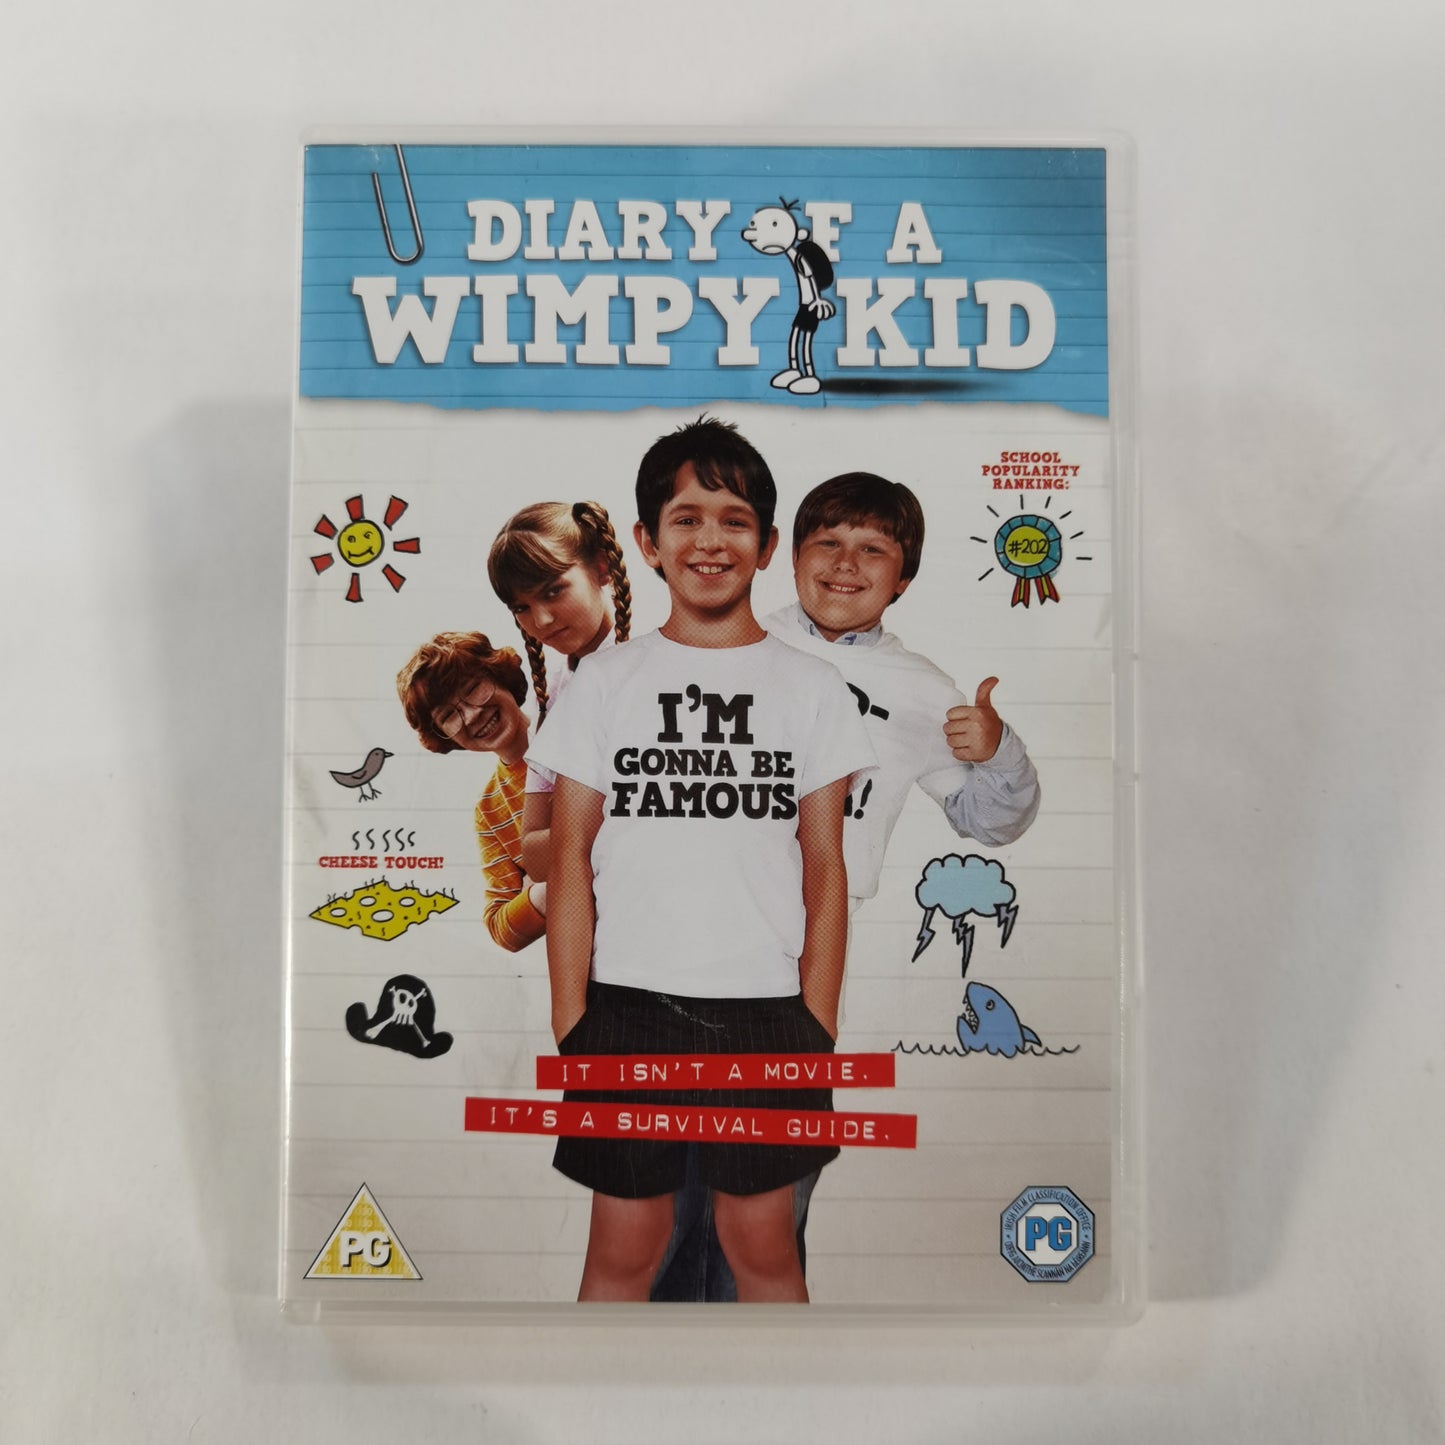 Diary of a Wimpy Kid (2010) - DVD UK 2012